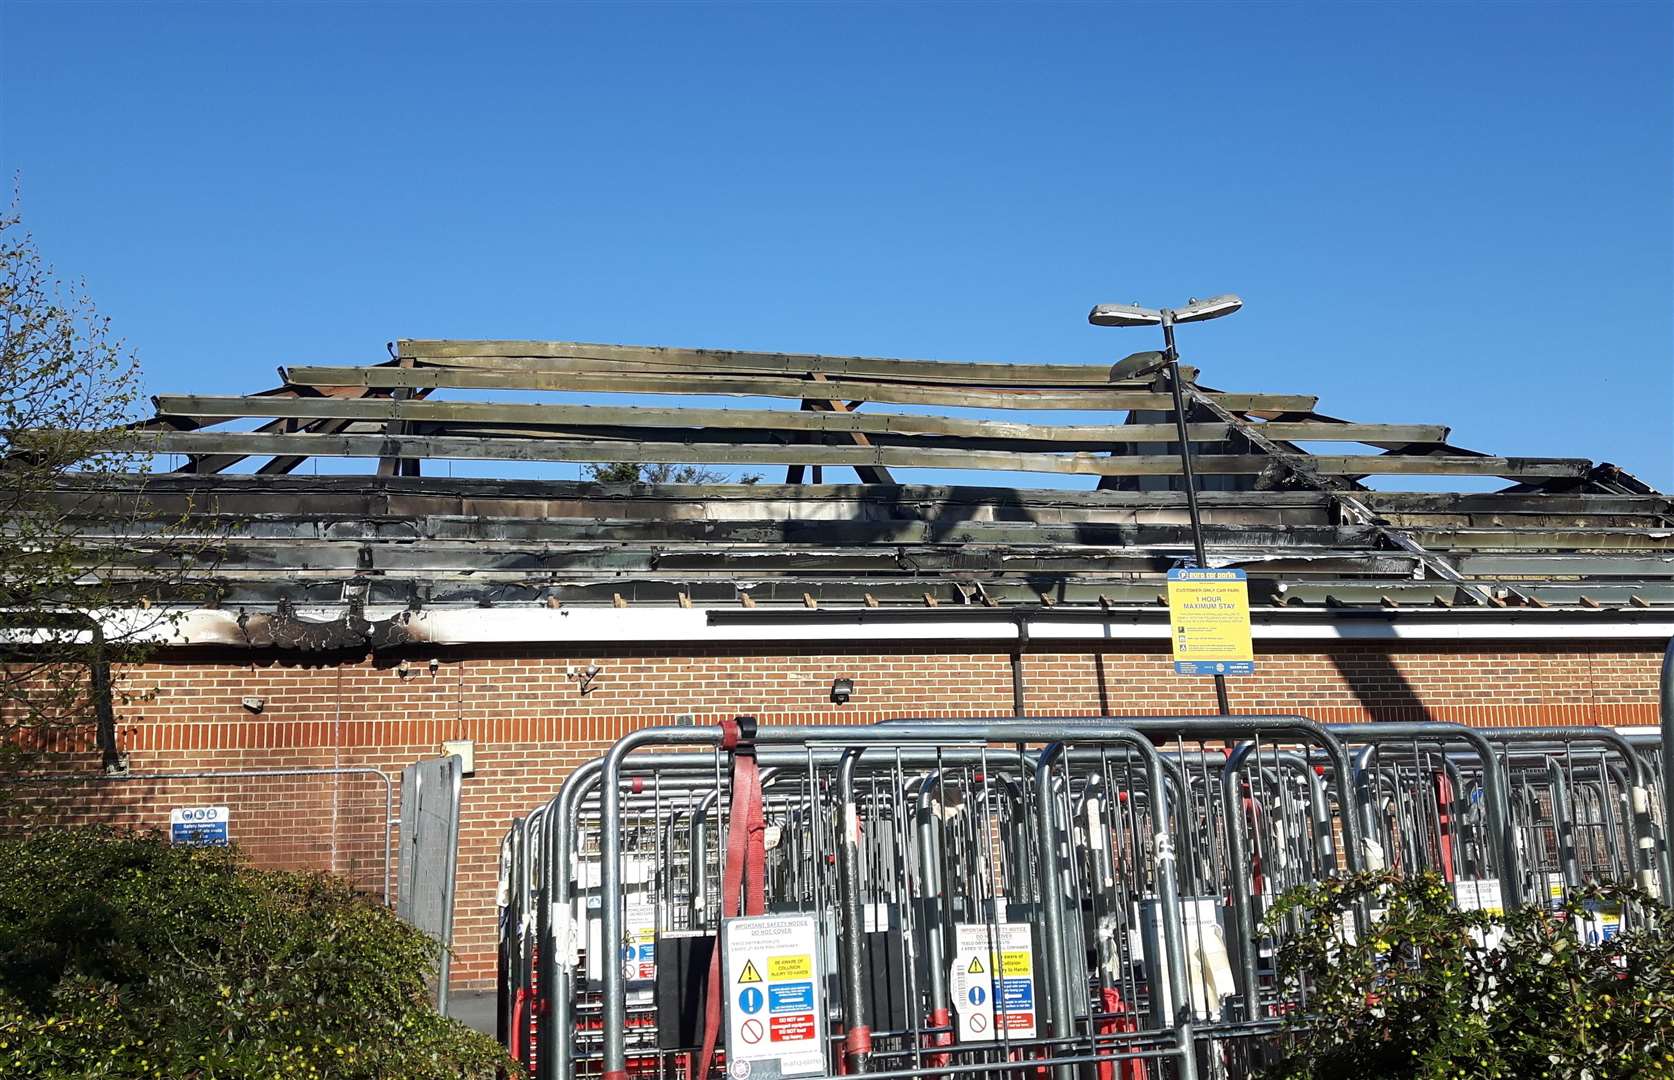 The badly damaged Tesco Express store in Mill Court, Ashford